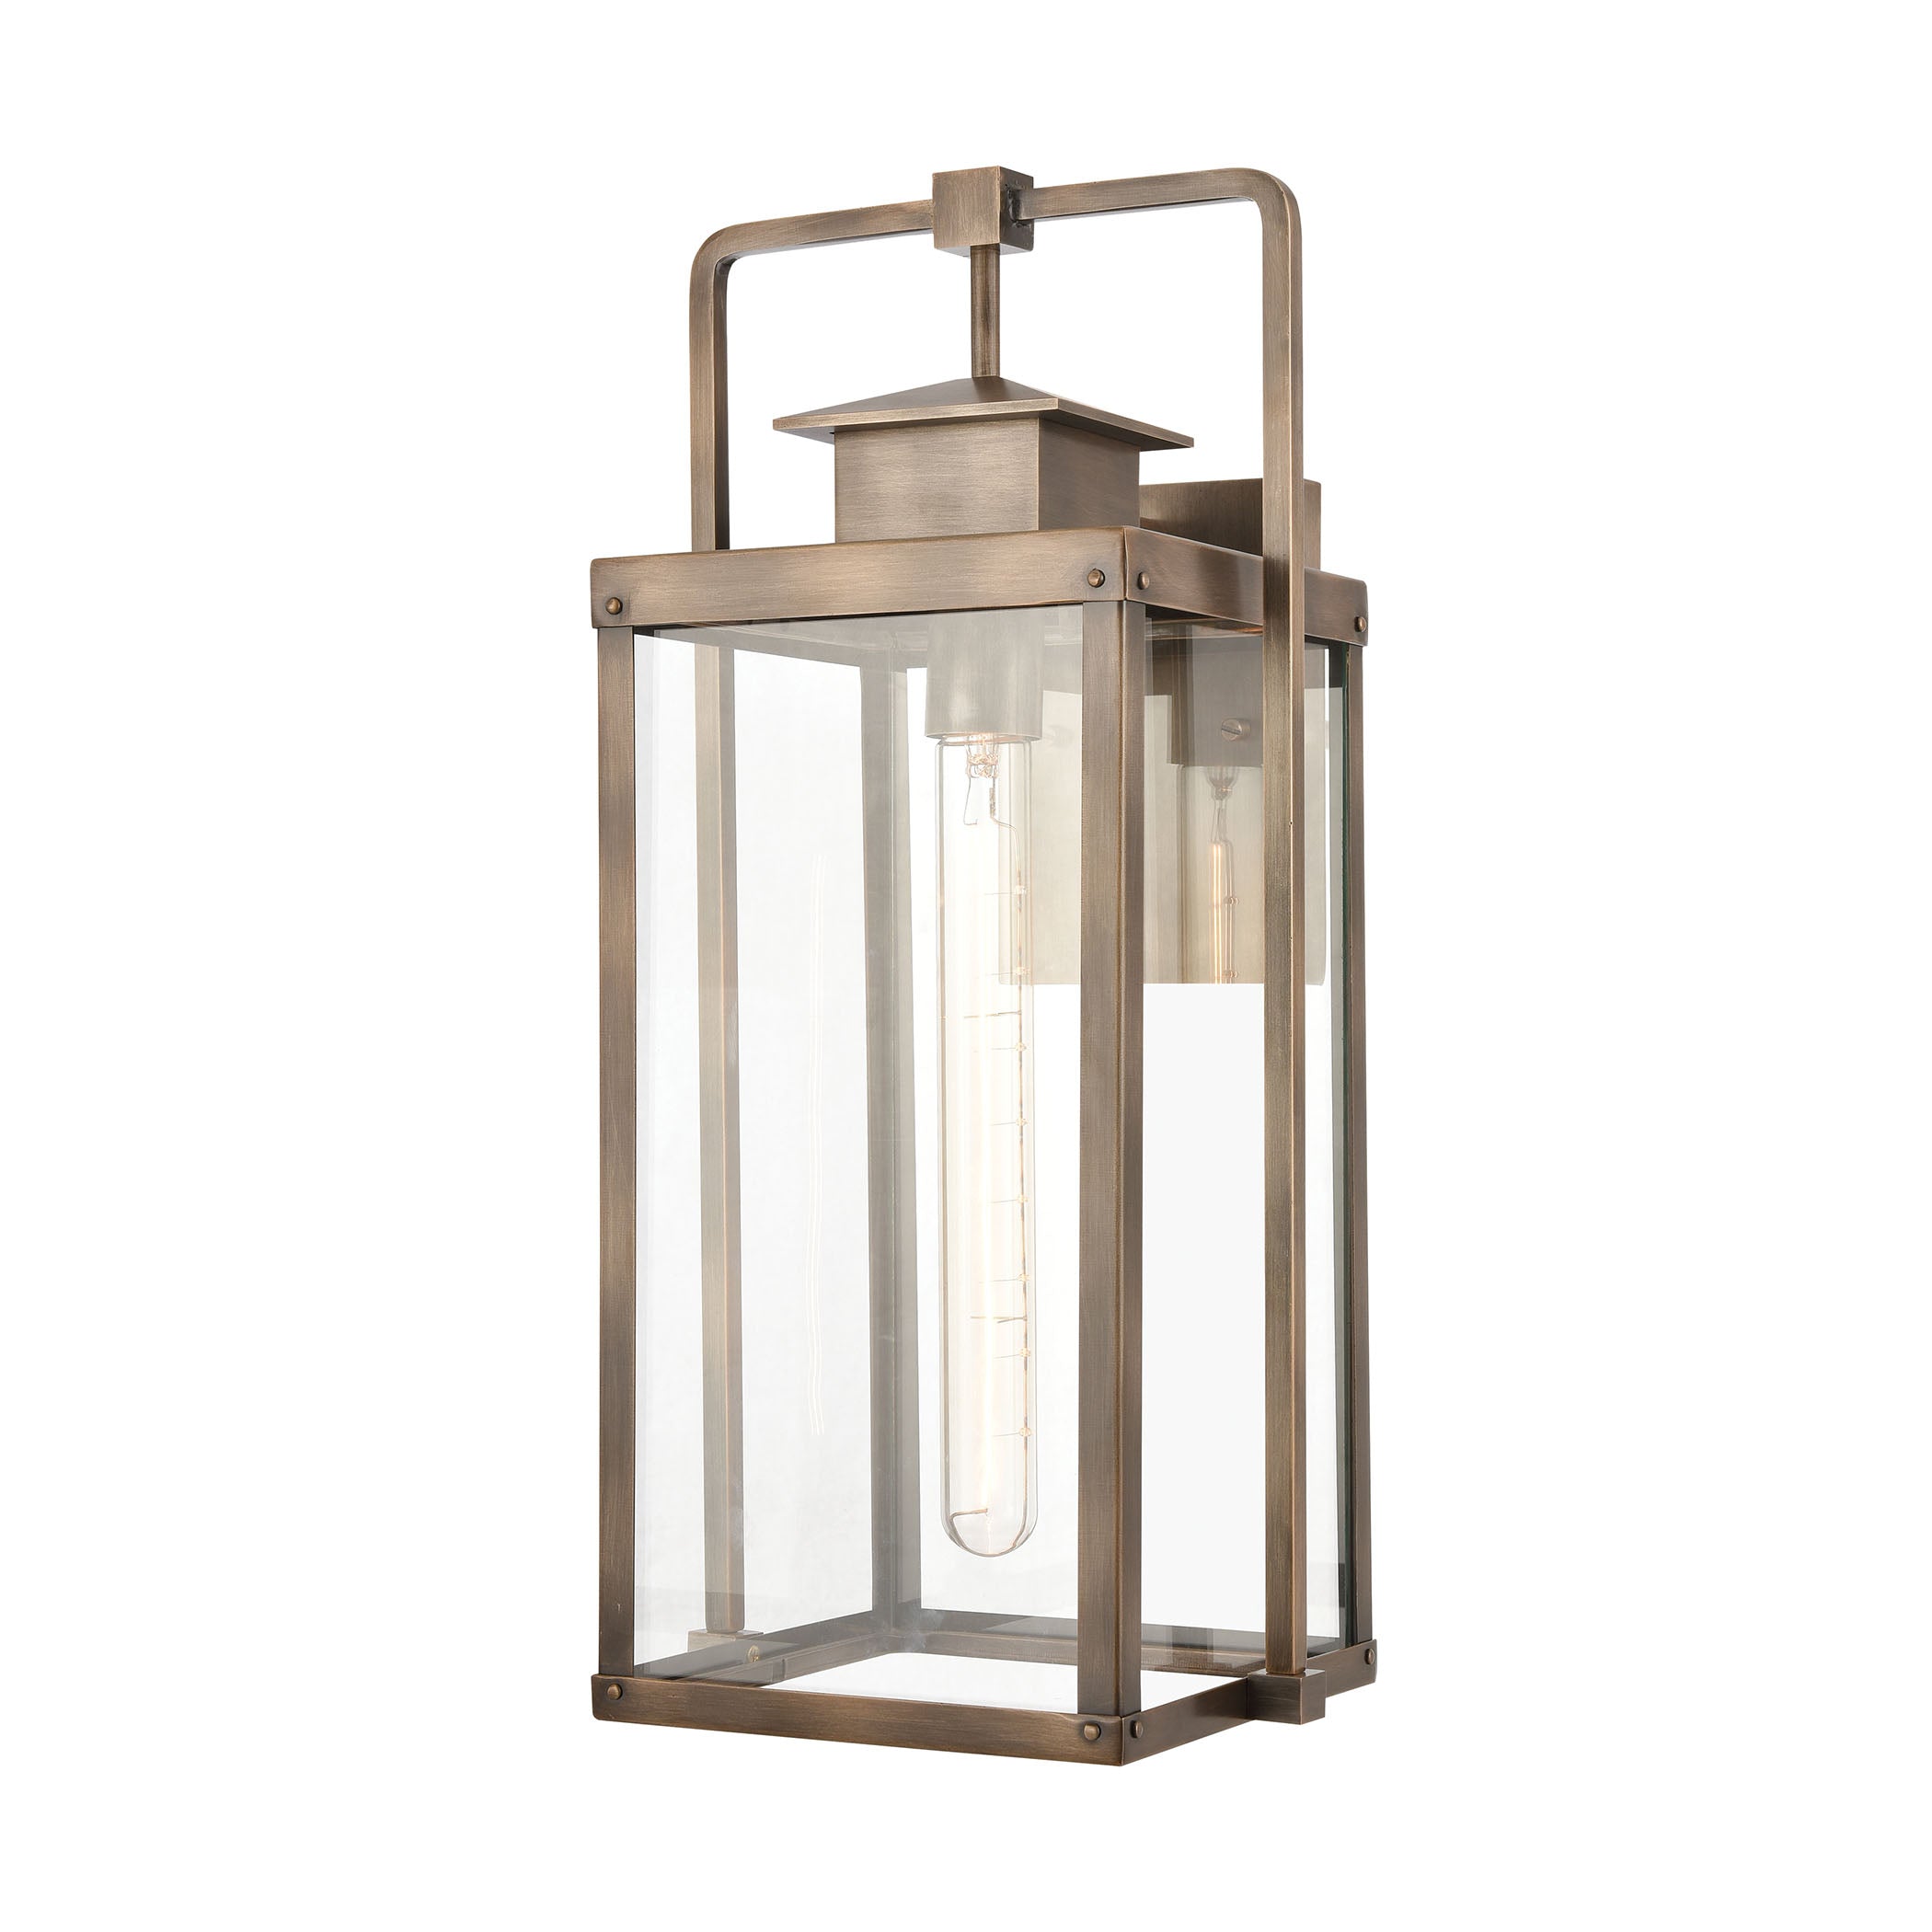 ELK Lighting 89183/1 Crested Butte 1-Light Outdoor Sconce in Vintage Brass with Clear Glass Enclosure